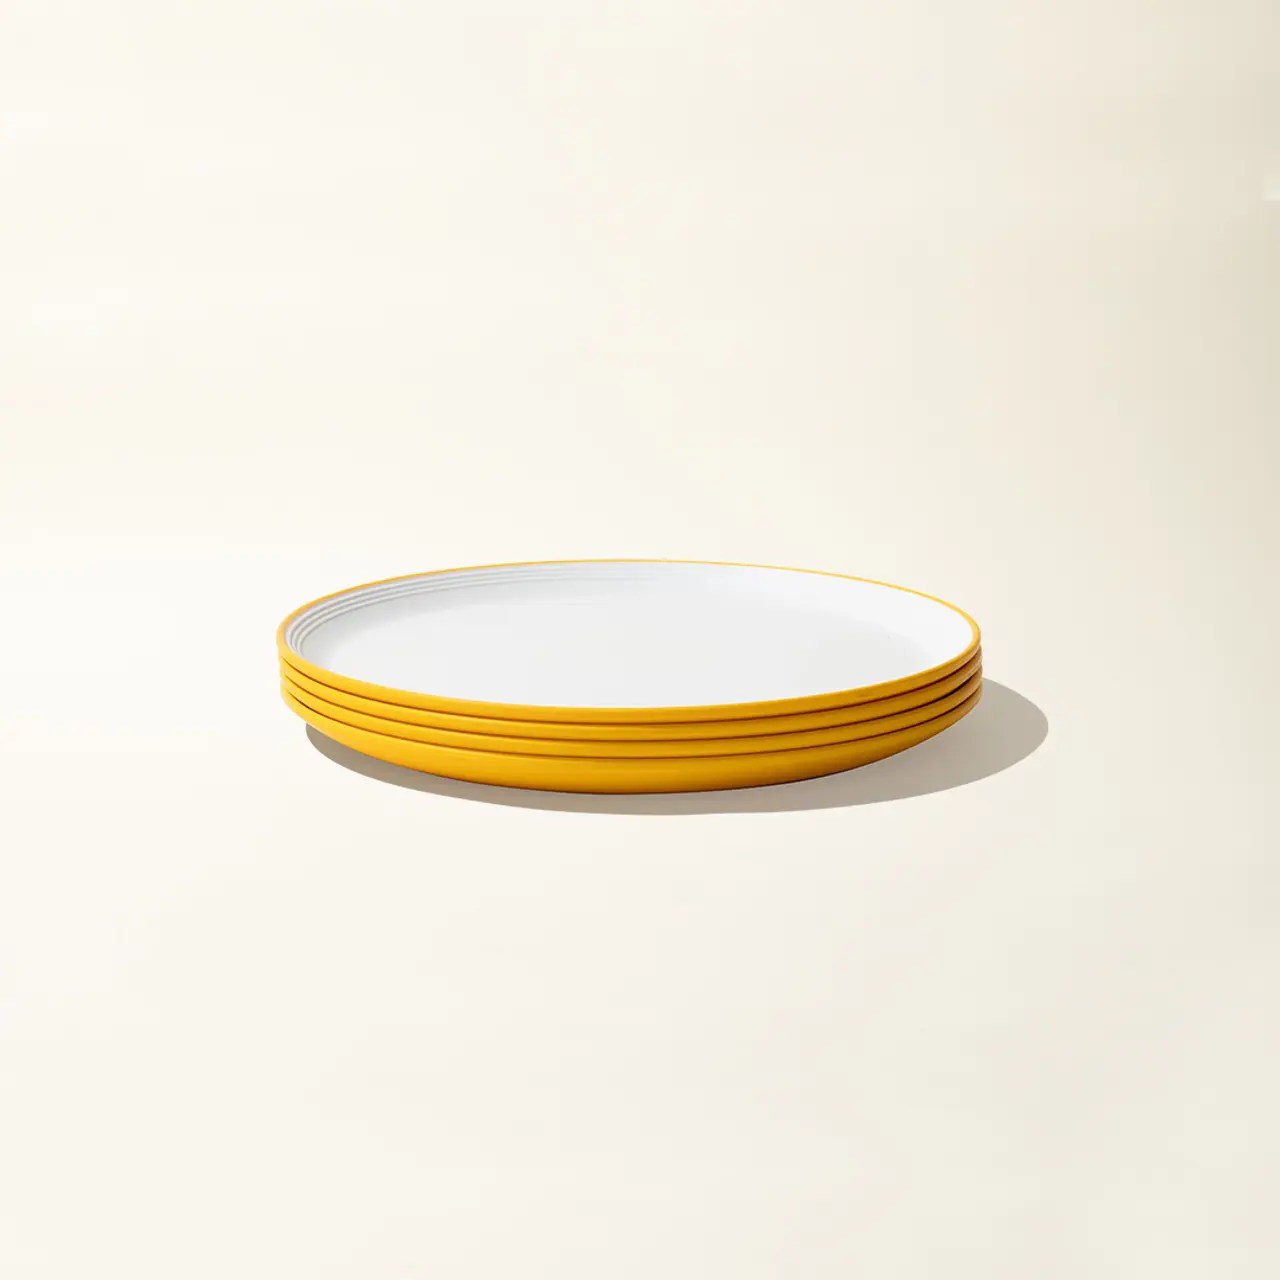 A stack of simple yellow-rimmed white plates on a light background.